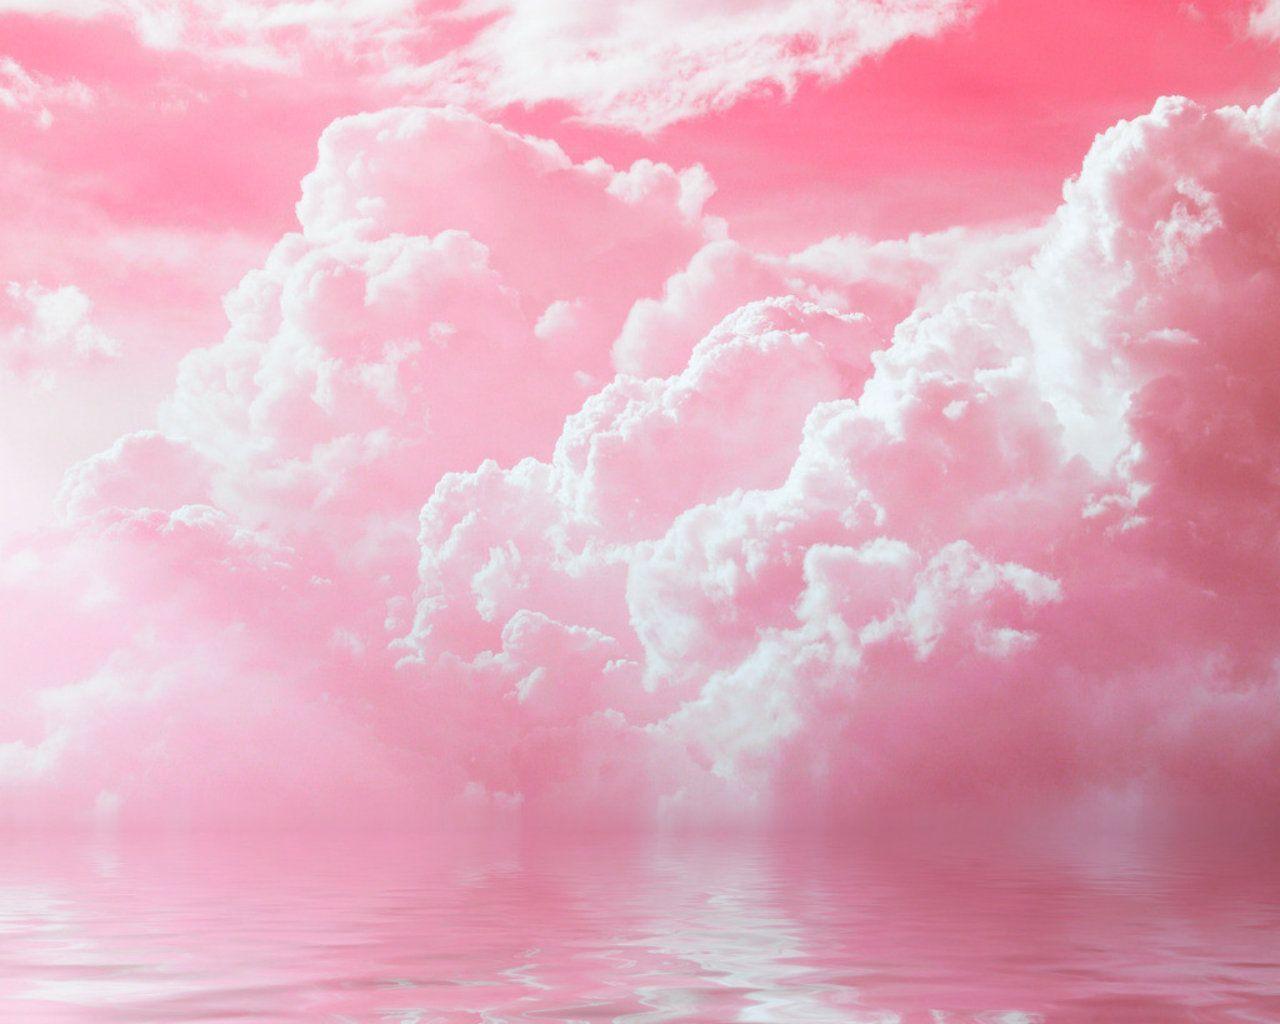 Pastel Aesthetic Clouds Wallpaper at